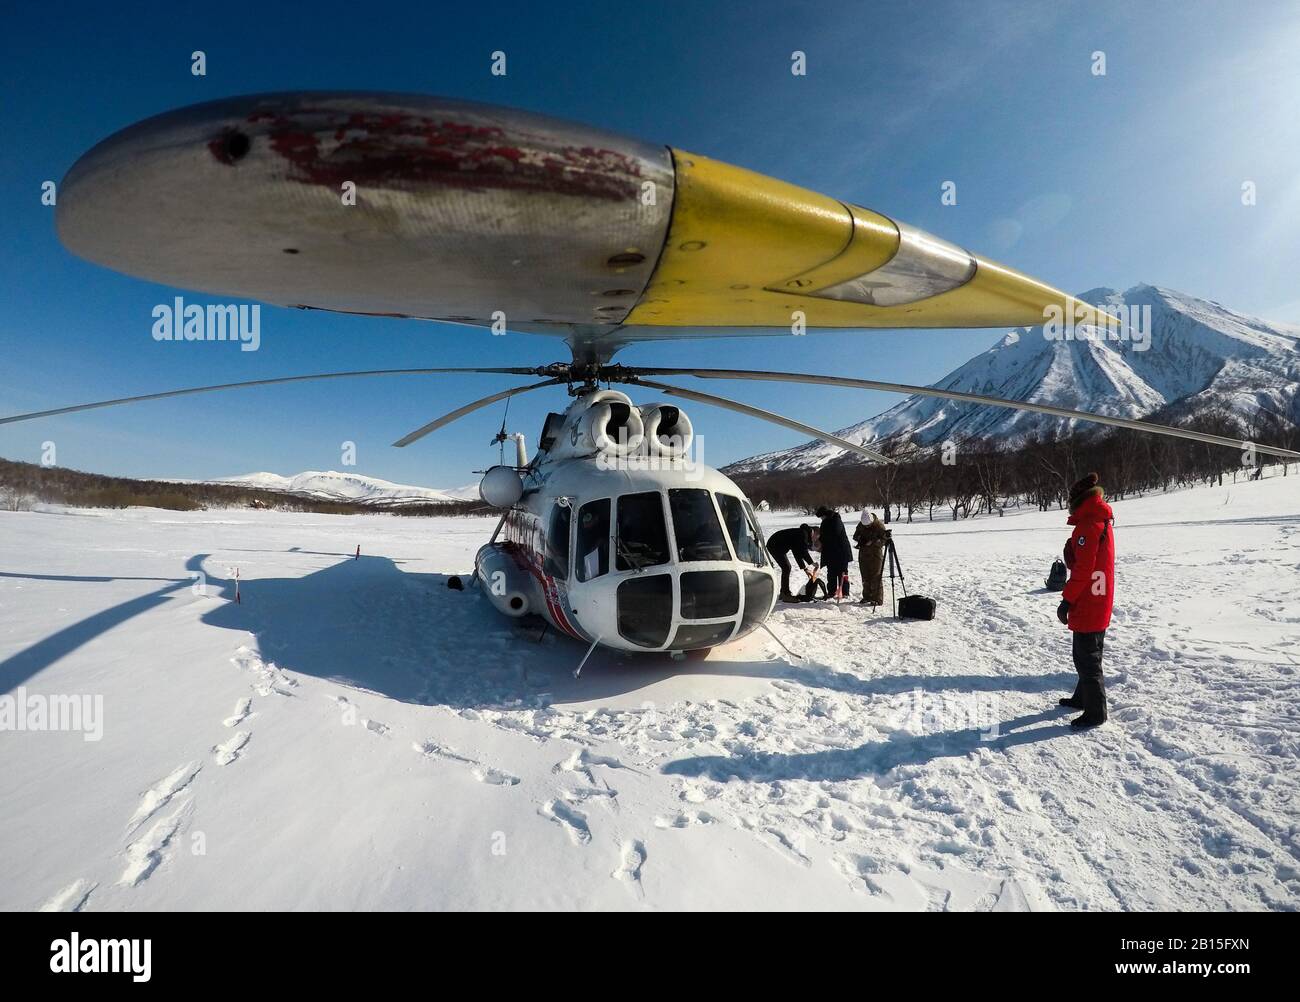 Kamchatka Territory Russia February 23 A Mil Mi 8 Helicopter Operated By The Vityaz Aero Air Carrier Taking Off From The Nikolayevka Airfield Yuri Smityuk Tass Stock Photo Alamy